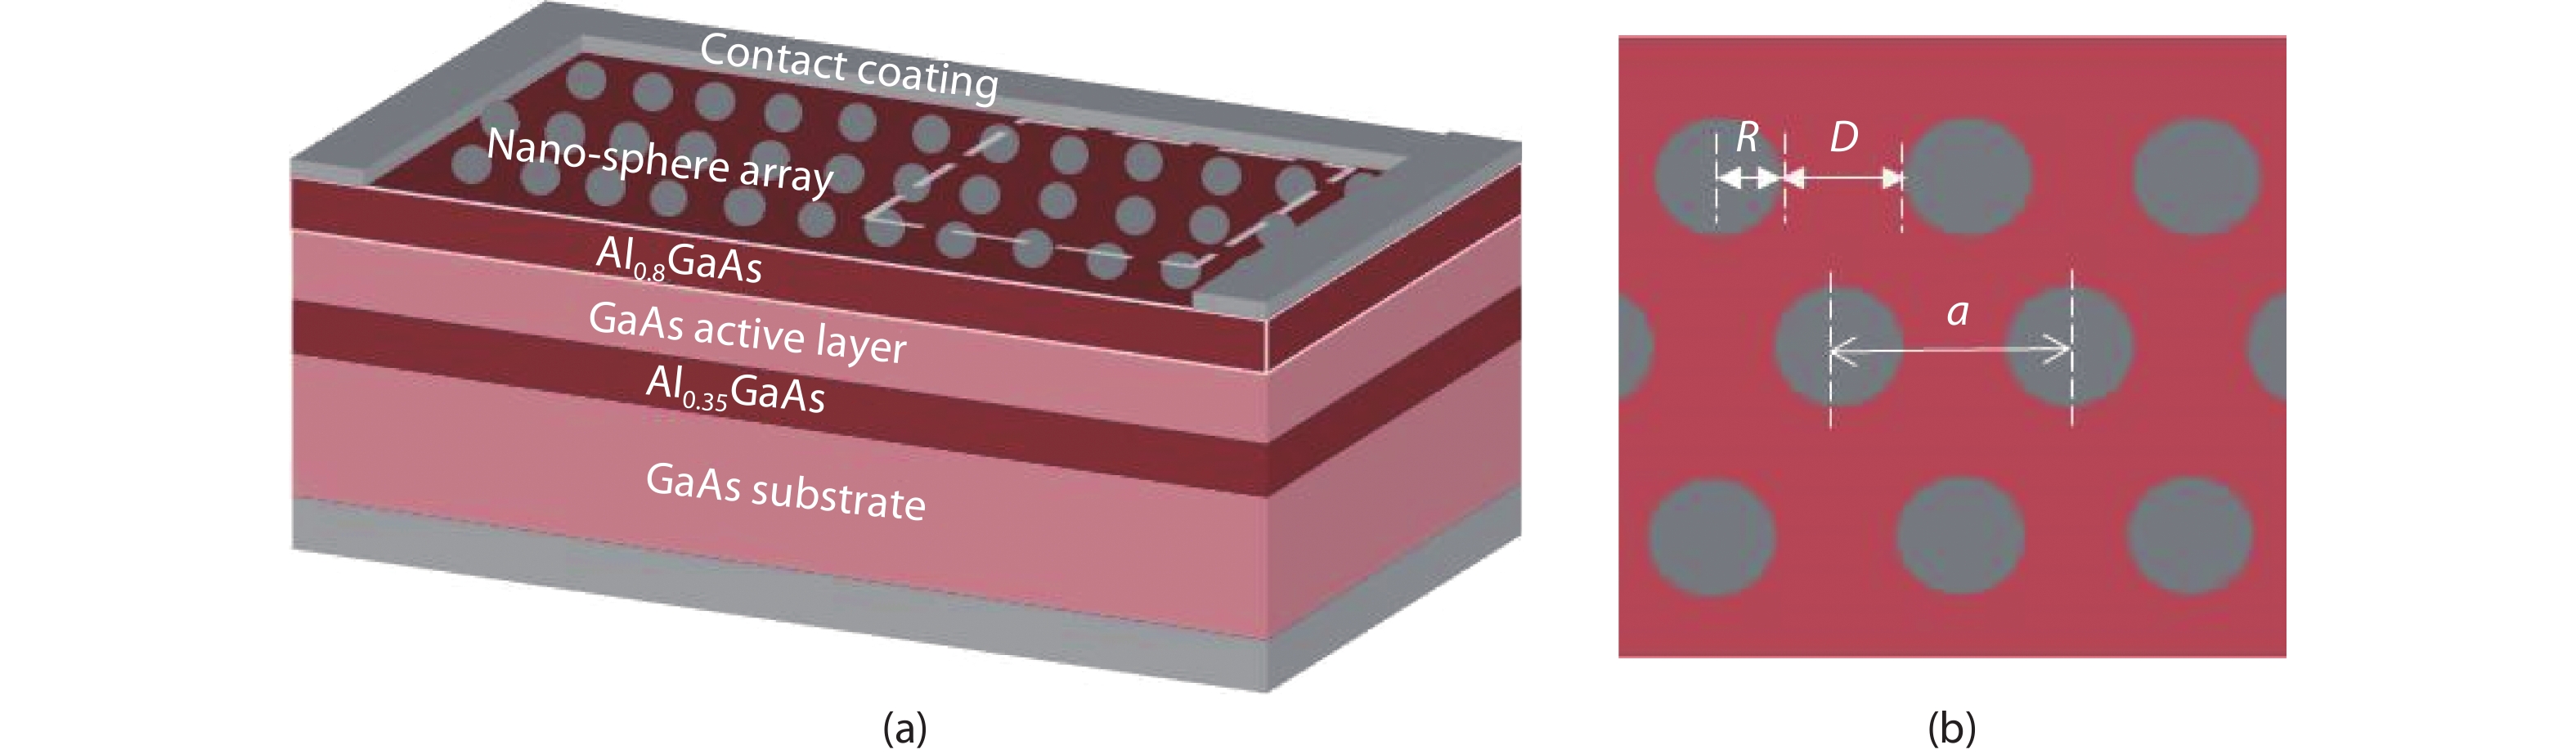 (Color online) (a) Schematic of the GaAs solar cell with nano-sphere array in side view. (b) Schematic top view of the nano-sphere surface array.